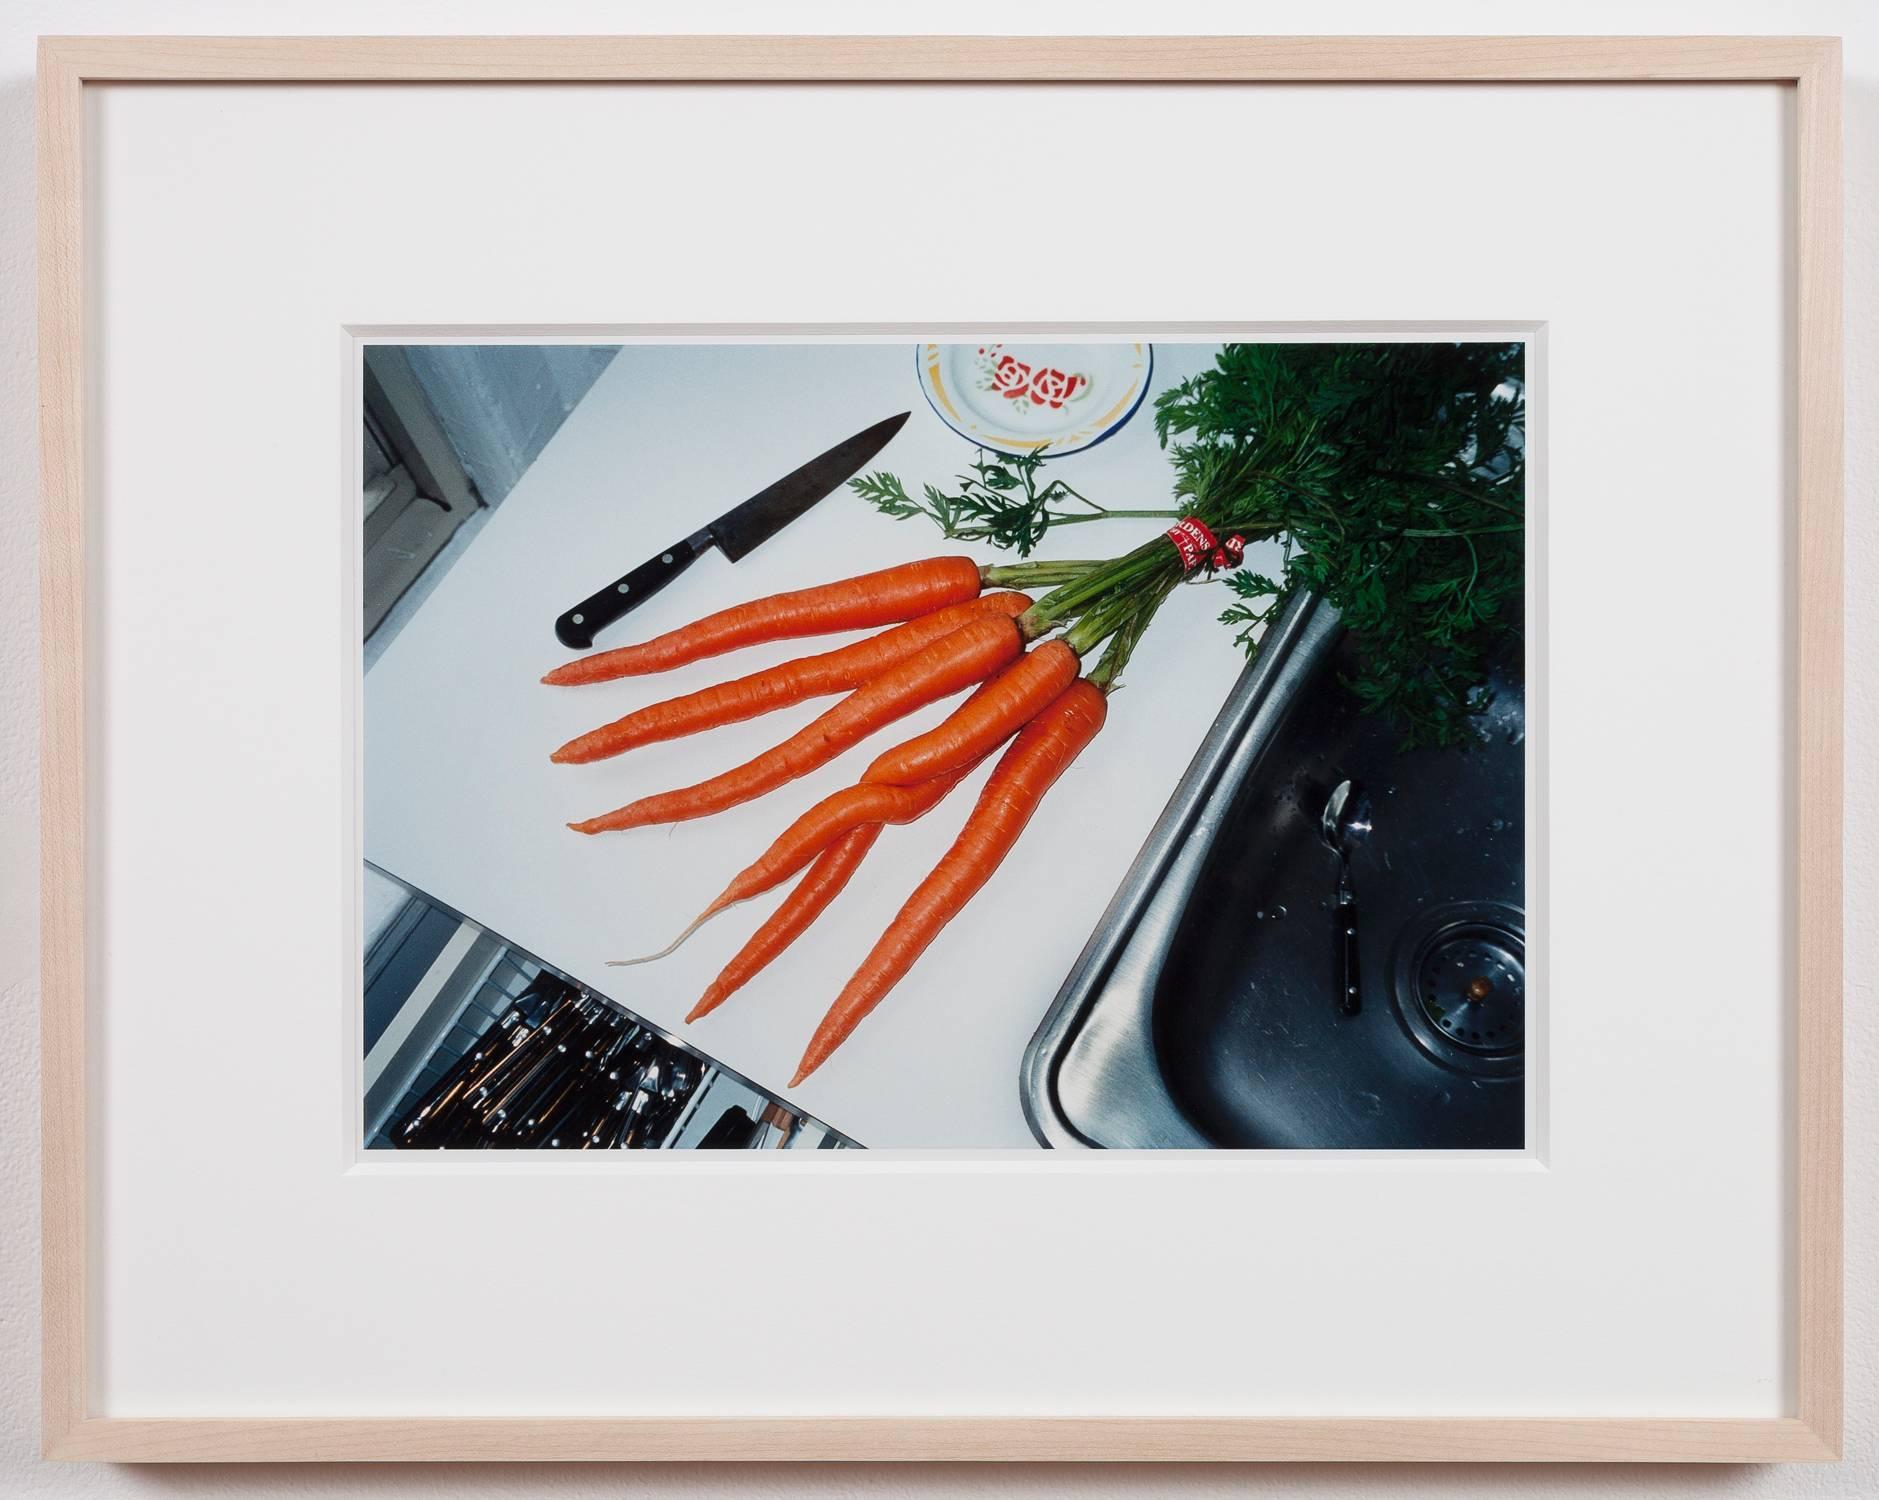 A bunch of carrots (New York) - Photograph by Mona Hatoum